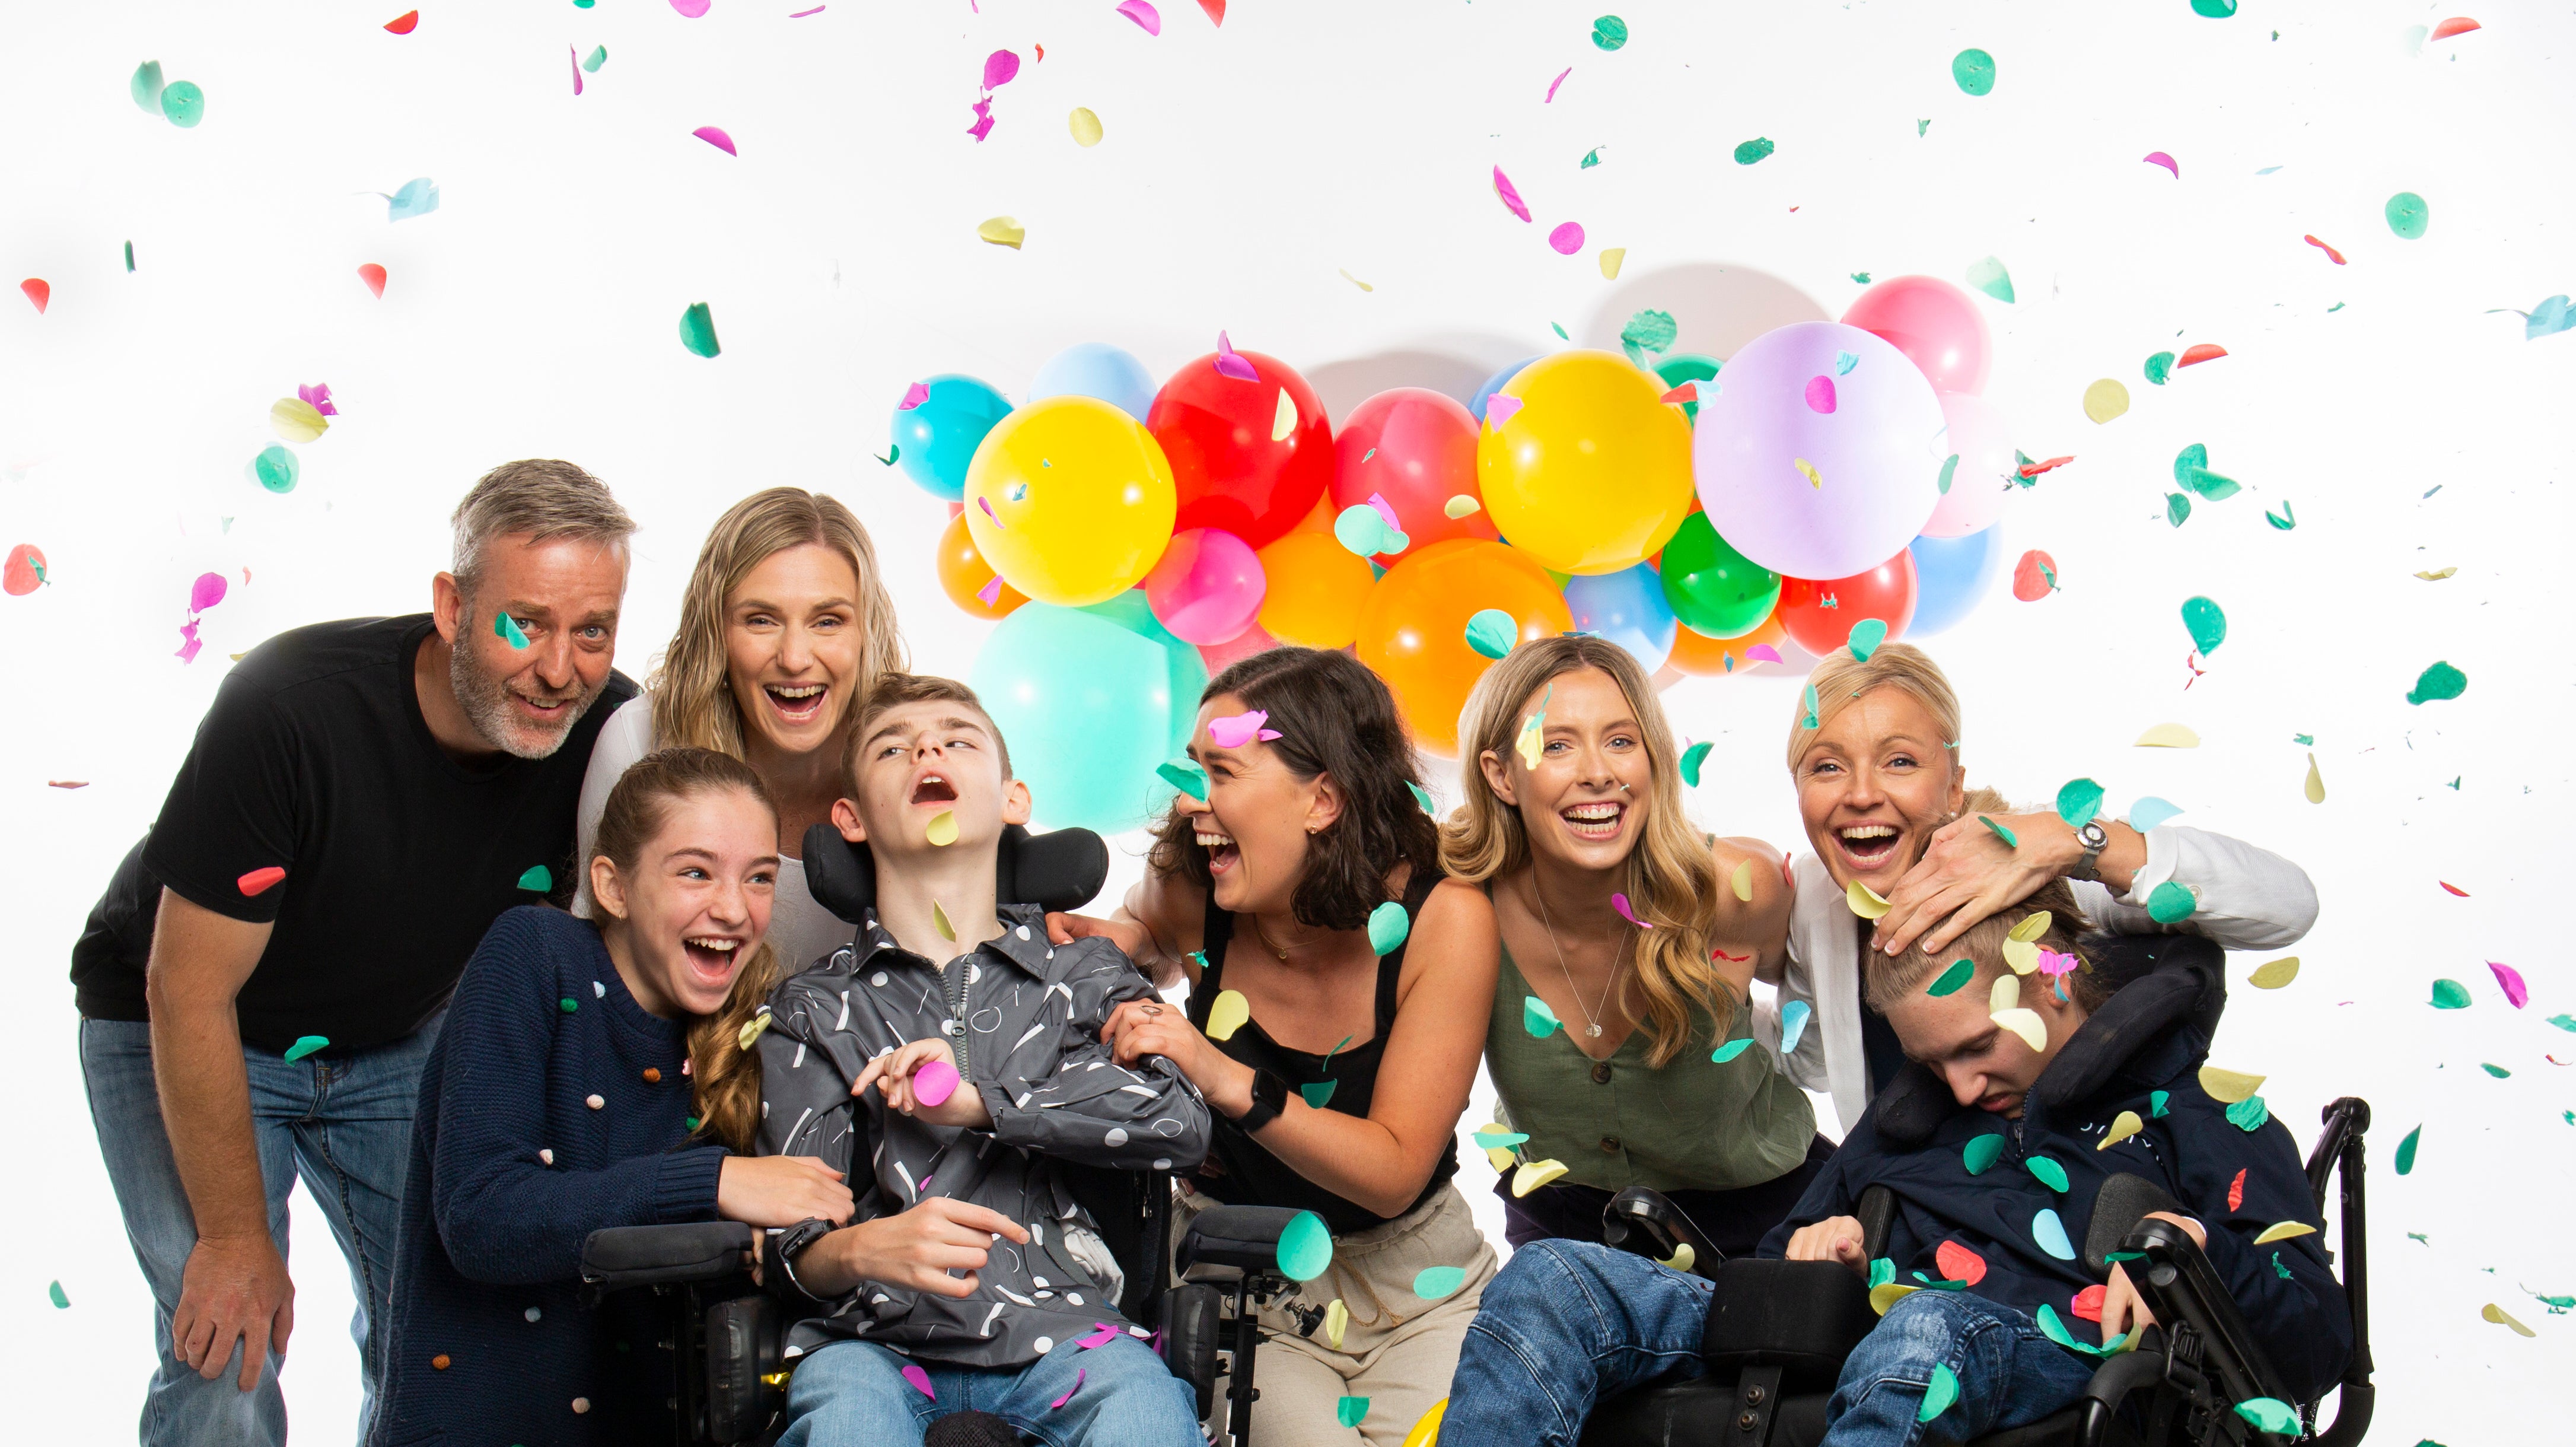 A group of people are surrounded by confetti and there is a brightly coloured balloon garland in the background